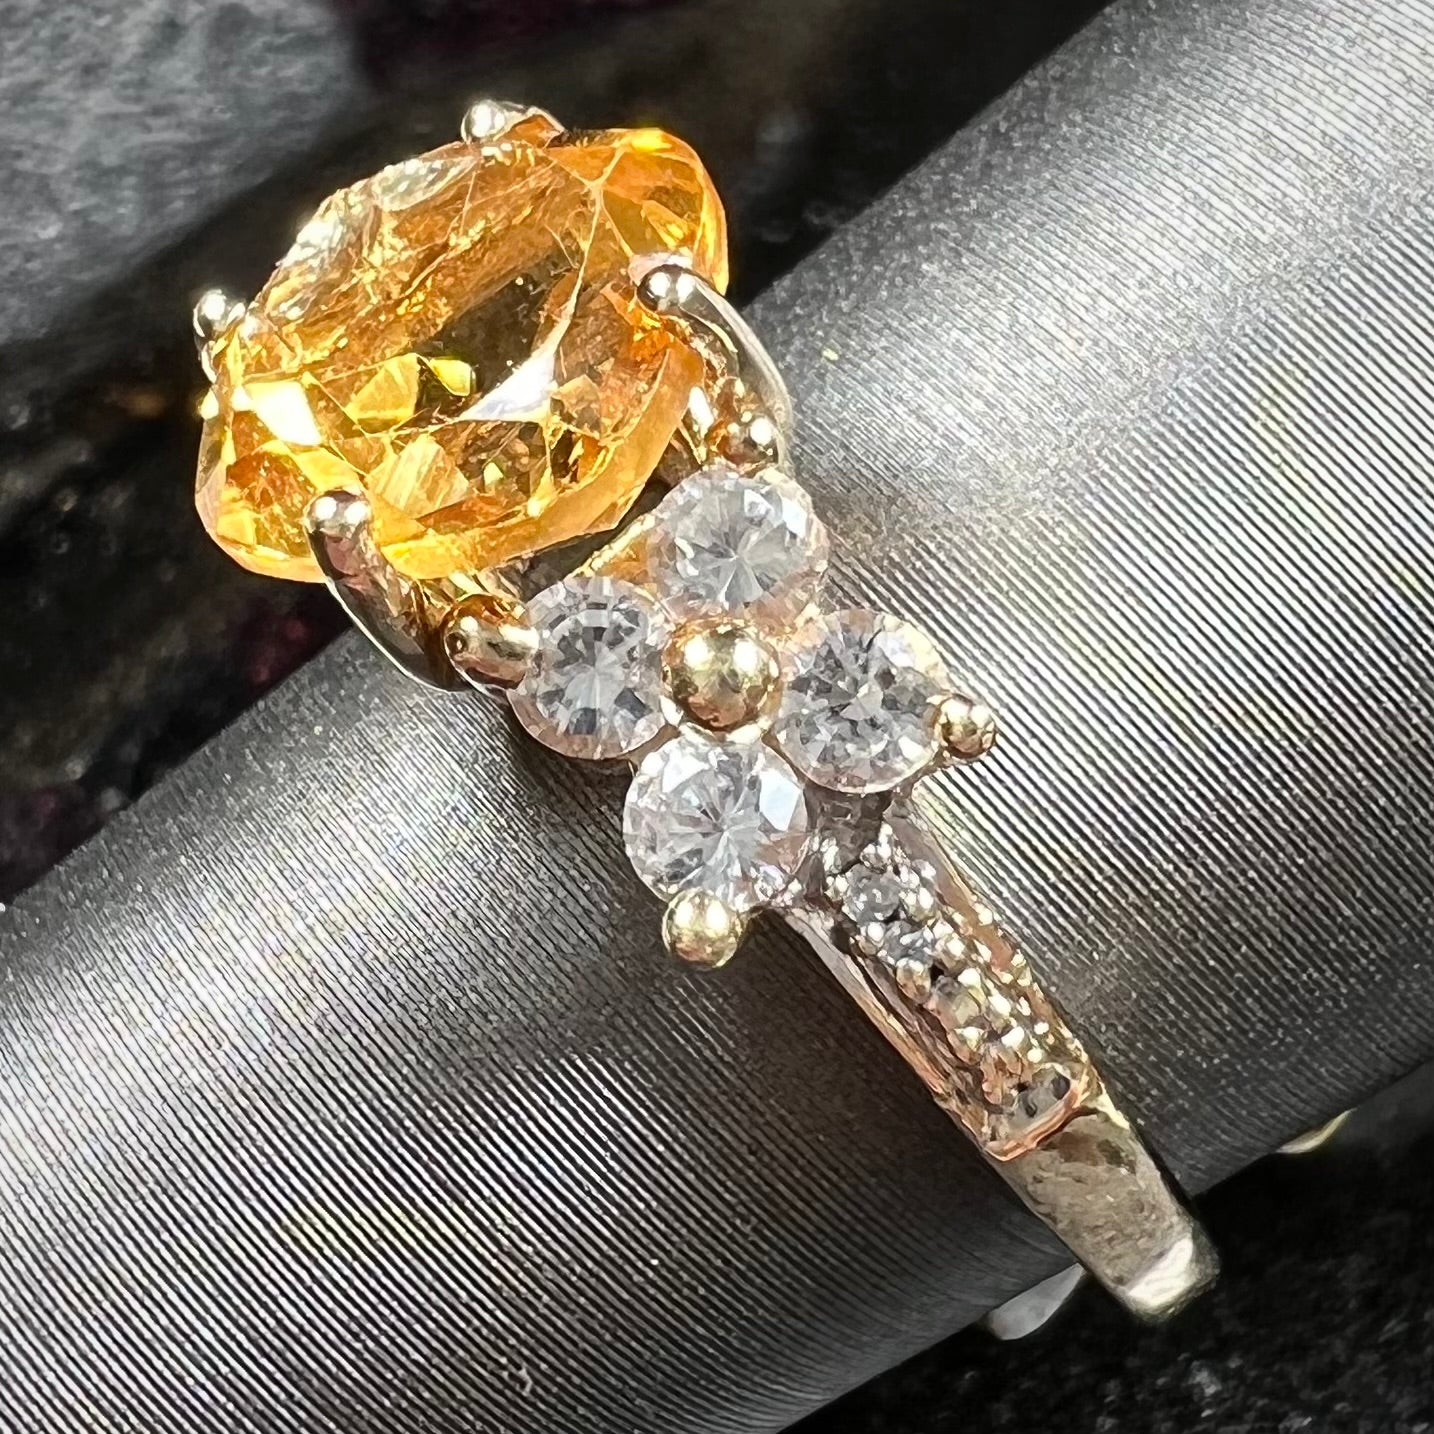 A cushion cut citrine set in a yellow gold ring with four round white sapphires and two diamonds on each side.